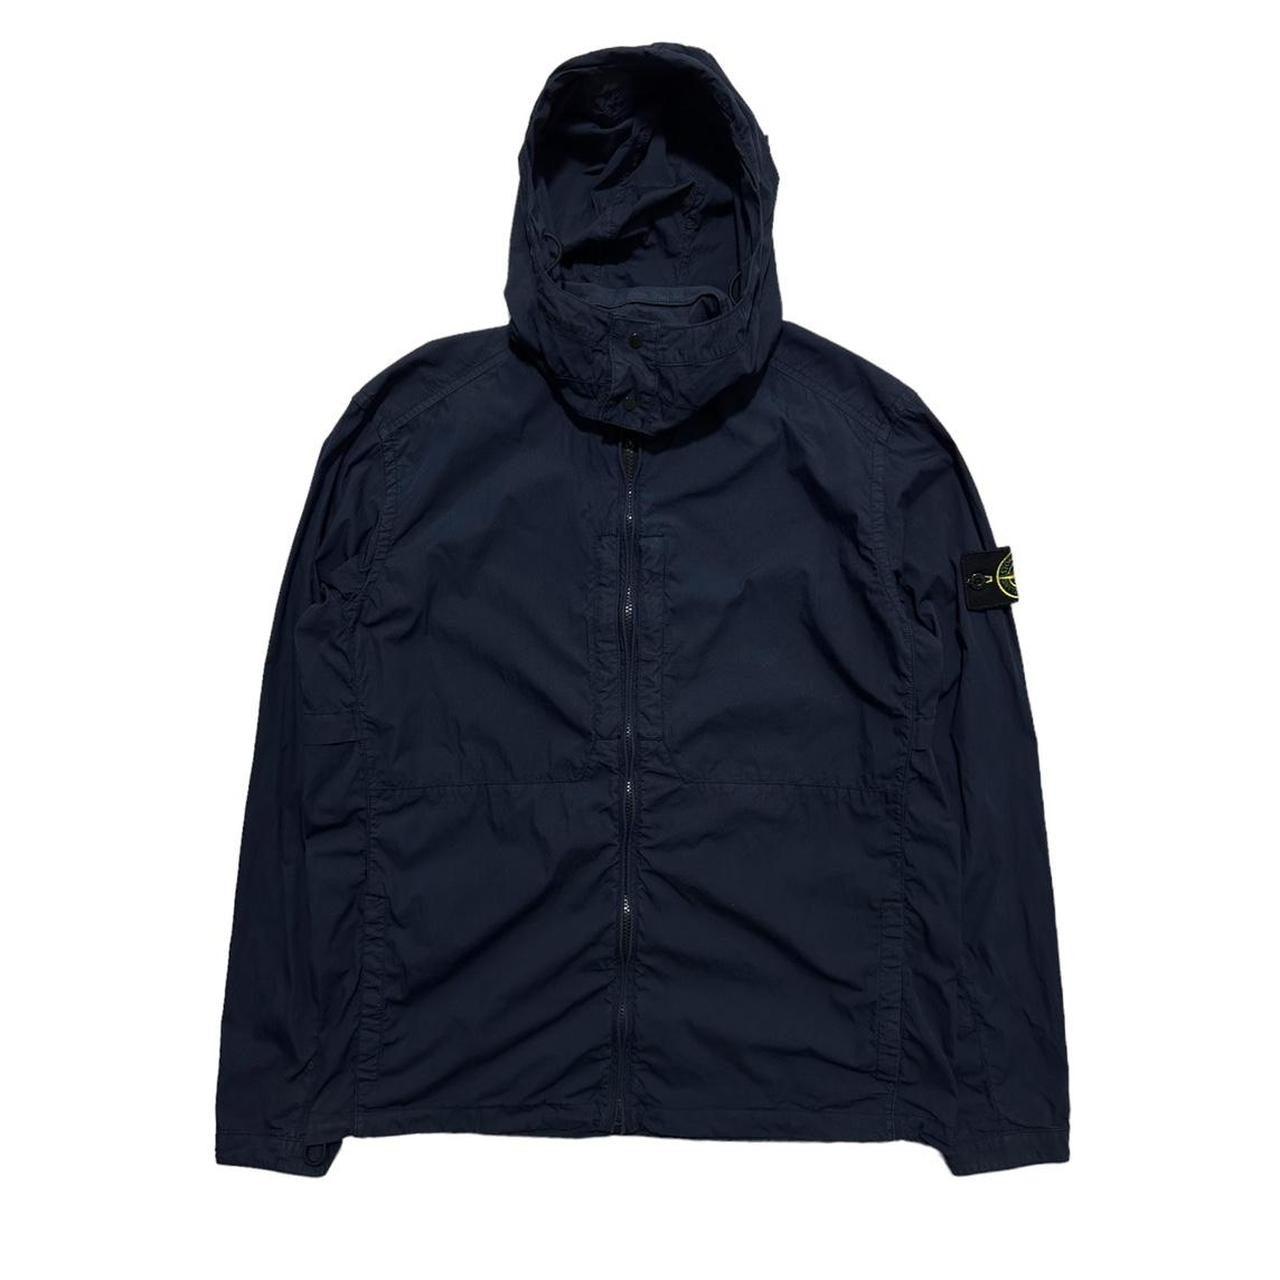 Stone Island Navy Foldable Hooded Overshirt - Known Source